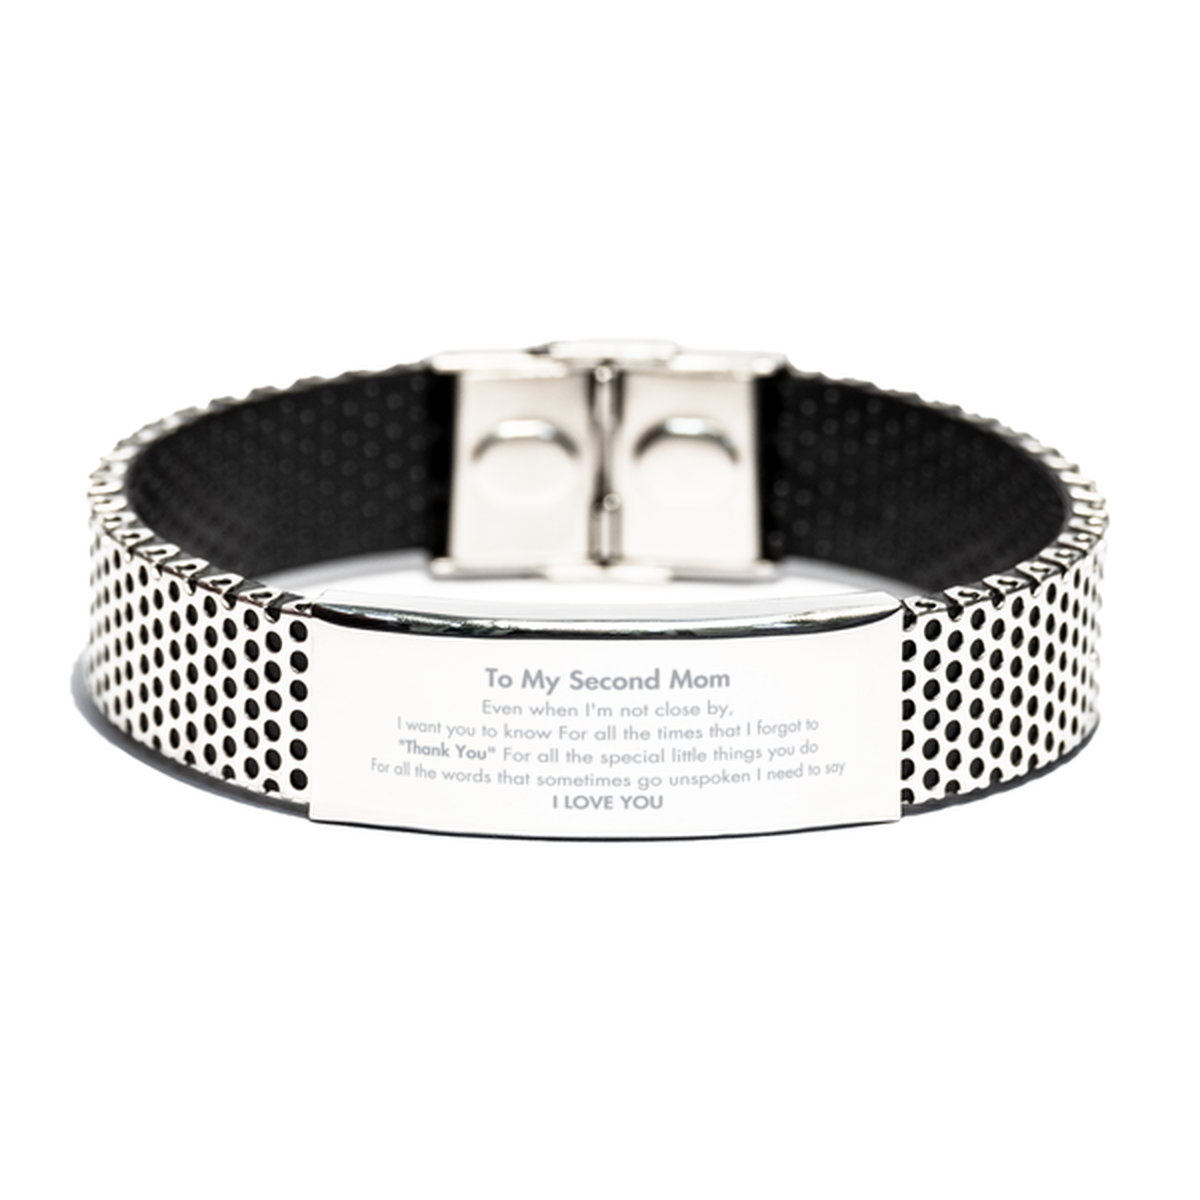 Thank You Gifts for Second Mom, Keepsake Stainless Steel Bracelet Gifts for Second Mom Birthday Mother's day Father's Day Second Mom For all the words That sometimes go unspoken I need to say I LOVE YOU